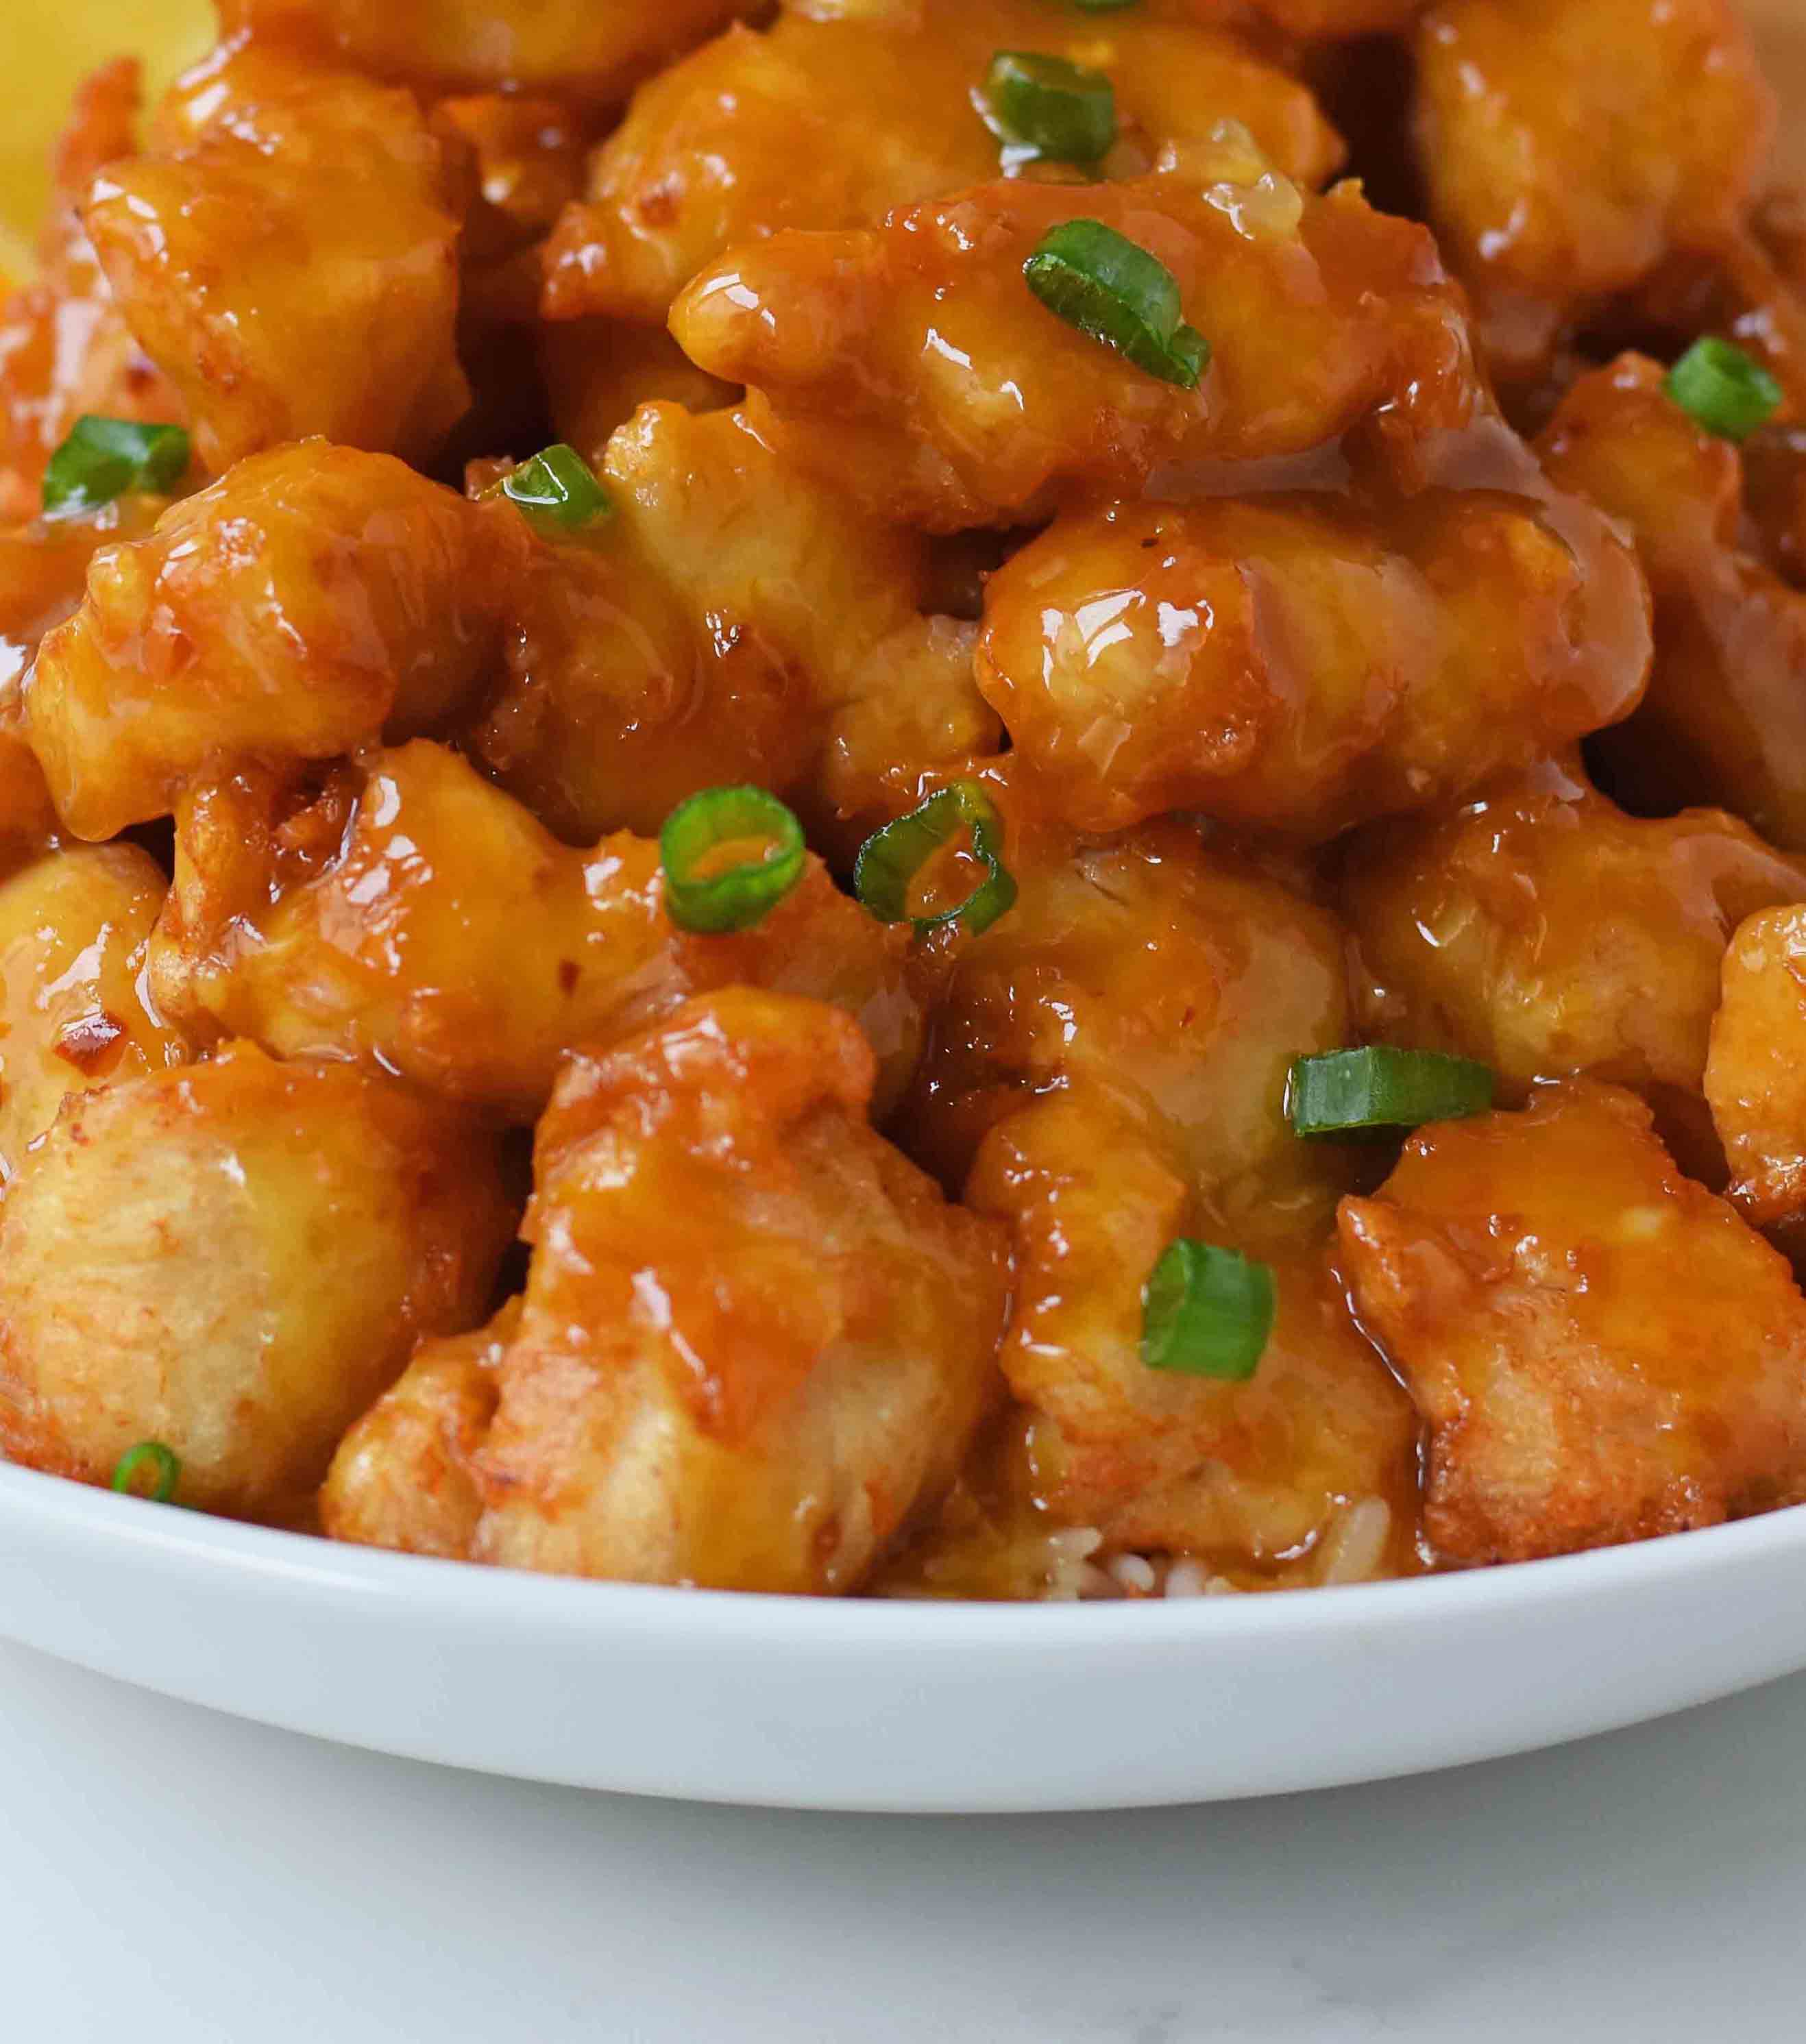 Chinese Orange Chicken that is better than take-out. How to make ORANGE CHICKEN at home with a sweet orange sauce. www.modernhoney.com